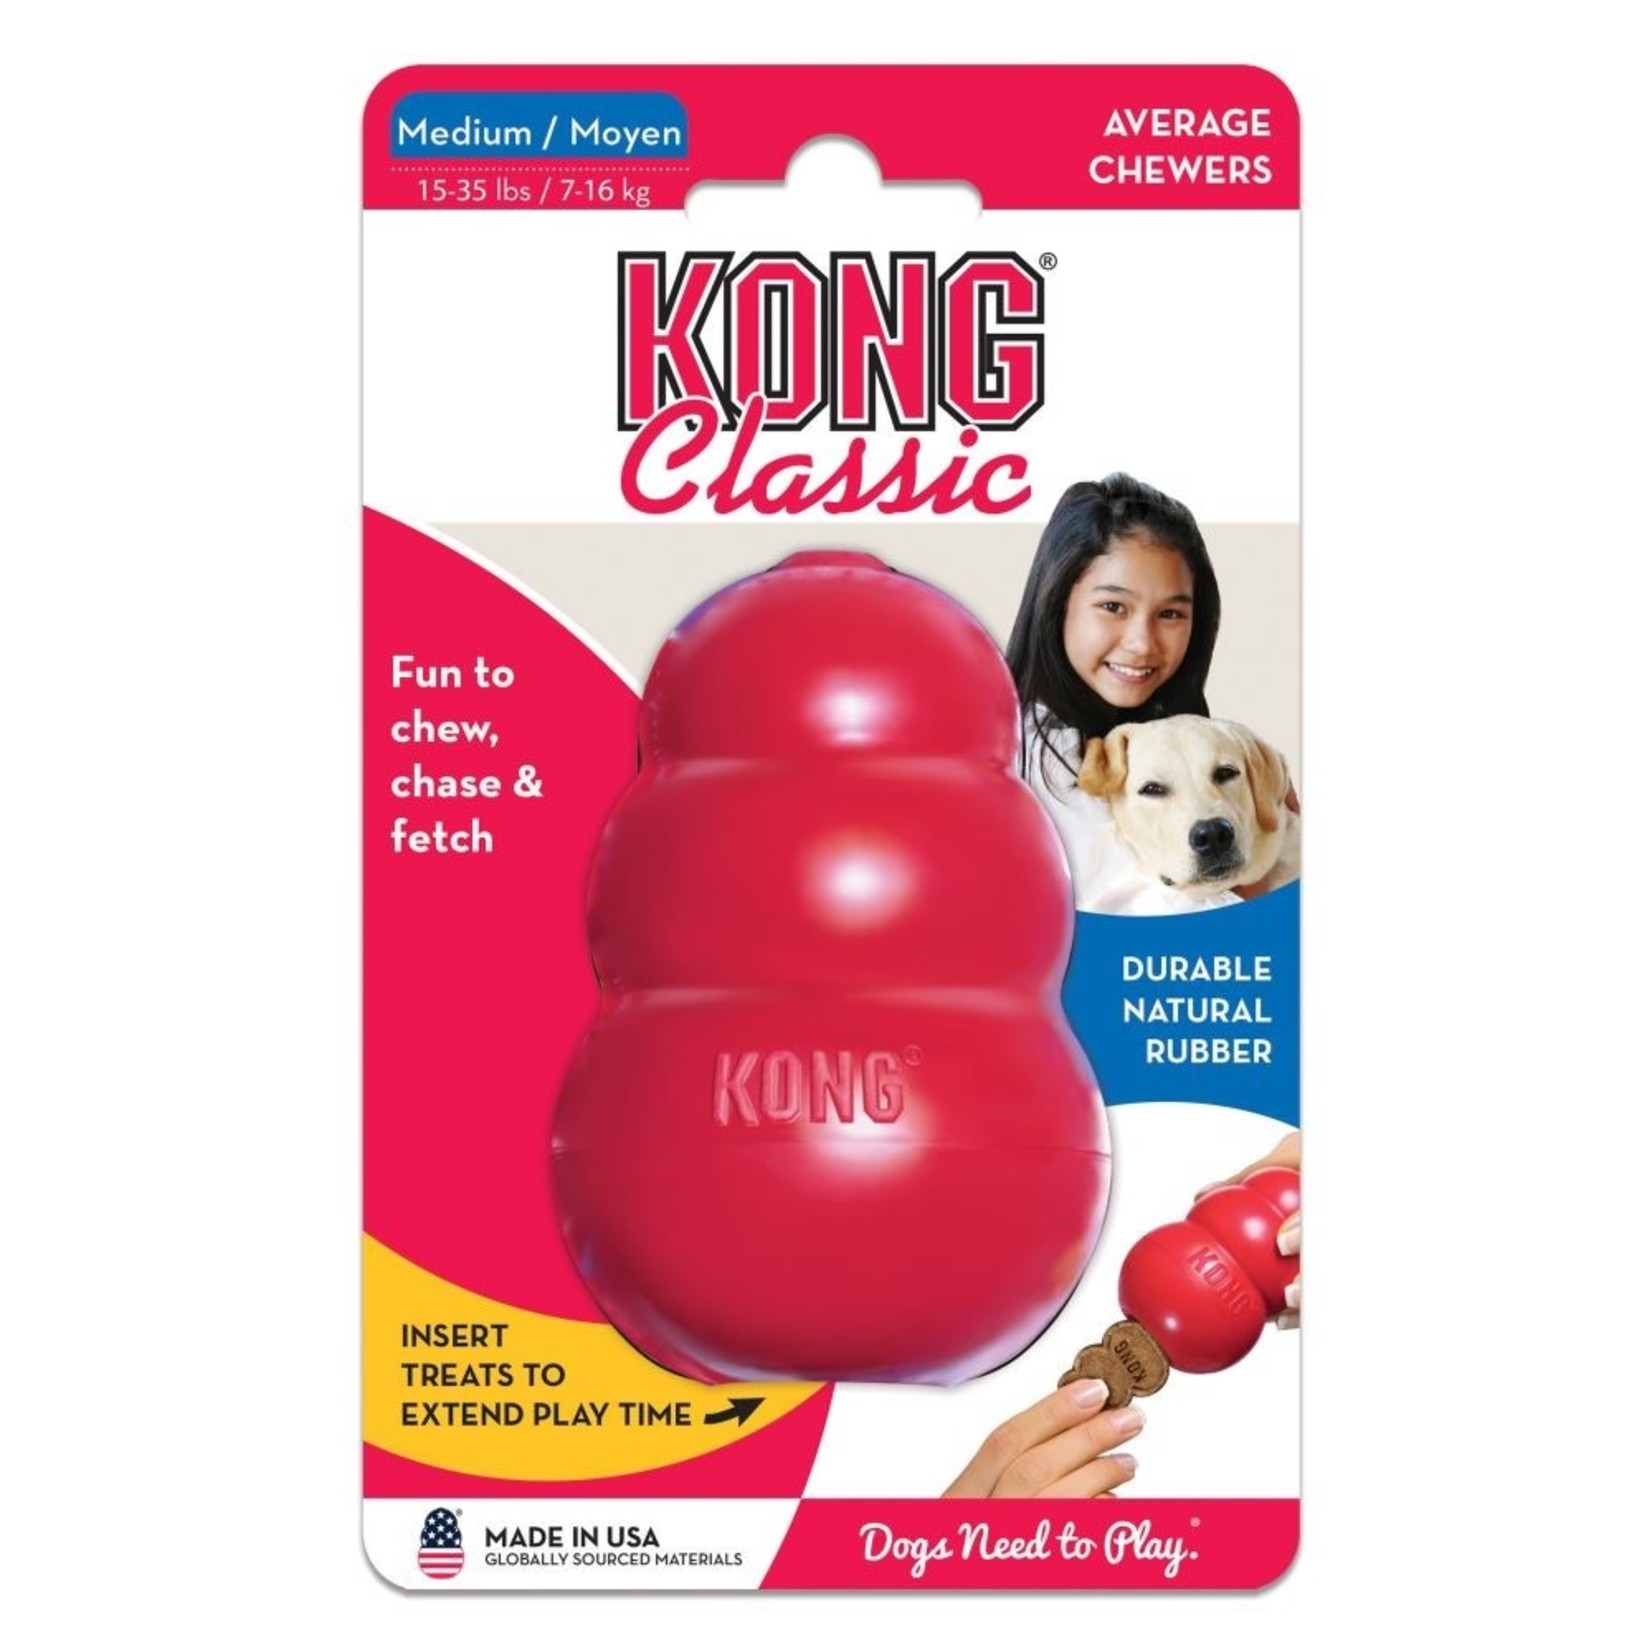 KONG Classic Red Rubber Dog Toy